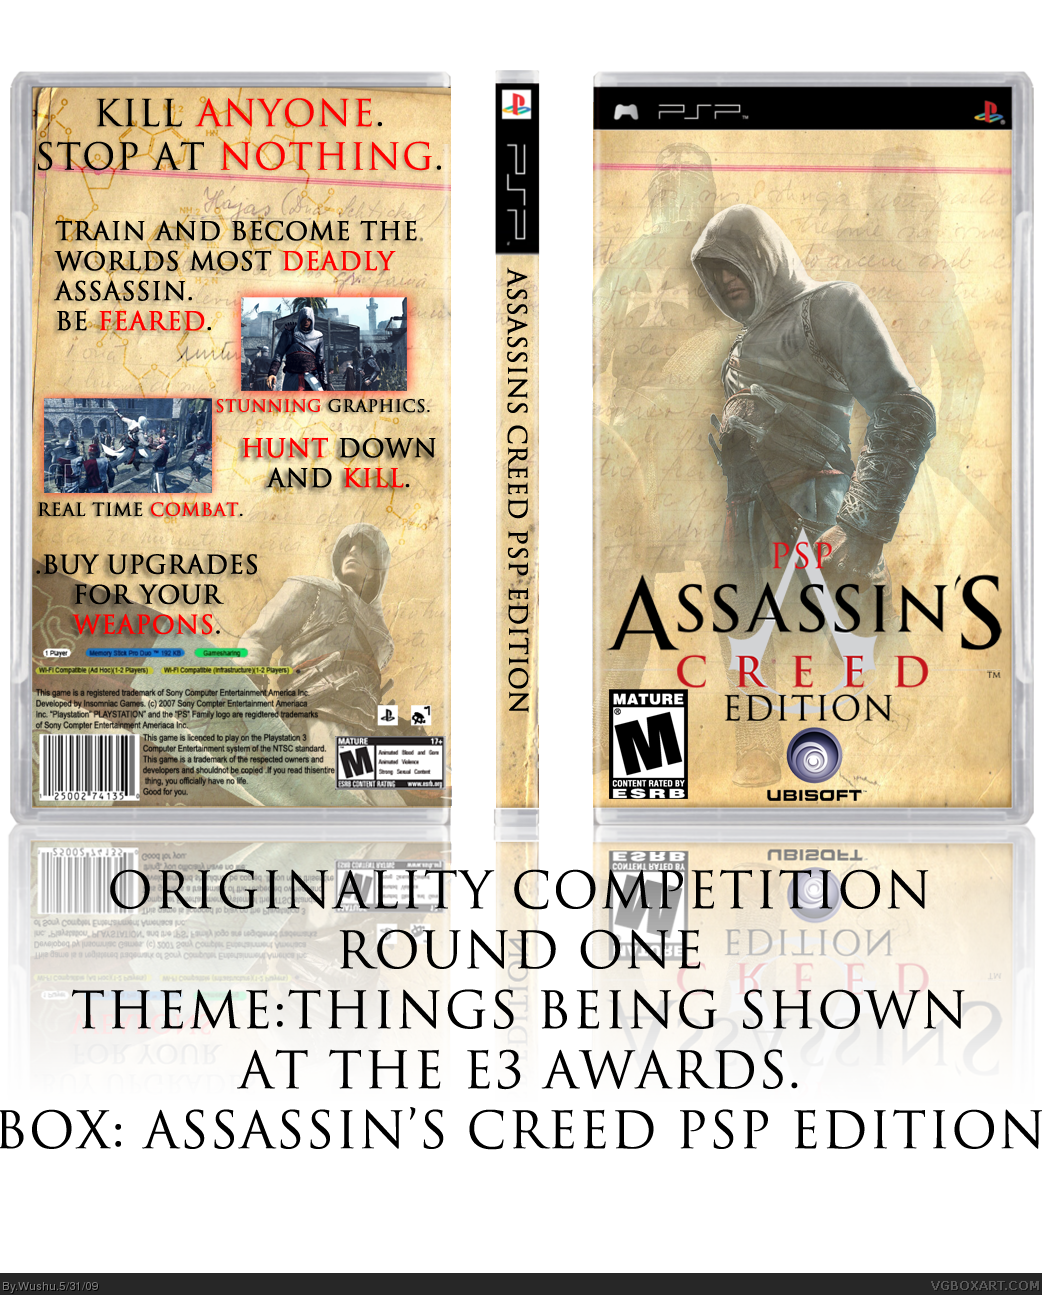 Assassin's Creed PSP Edition box cover